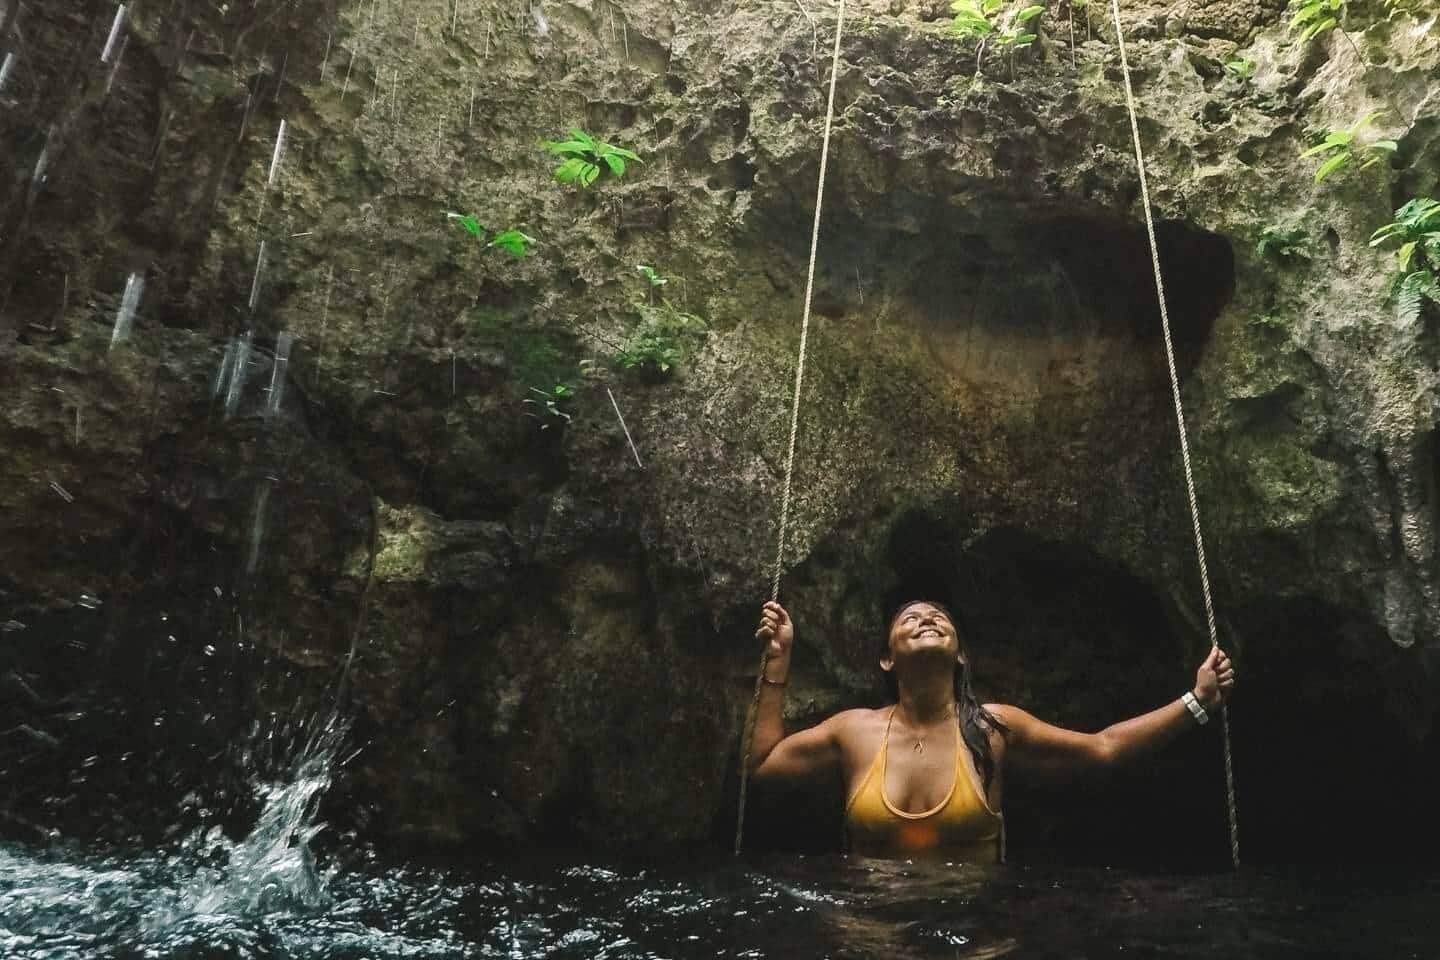 Anna, founder and editor of Adventure in You in a cenote